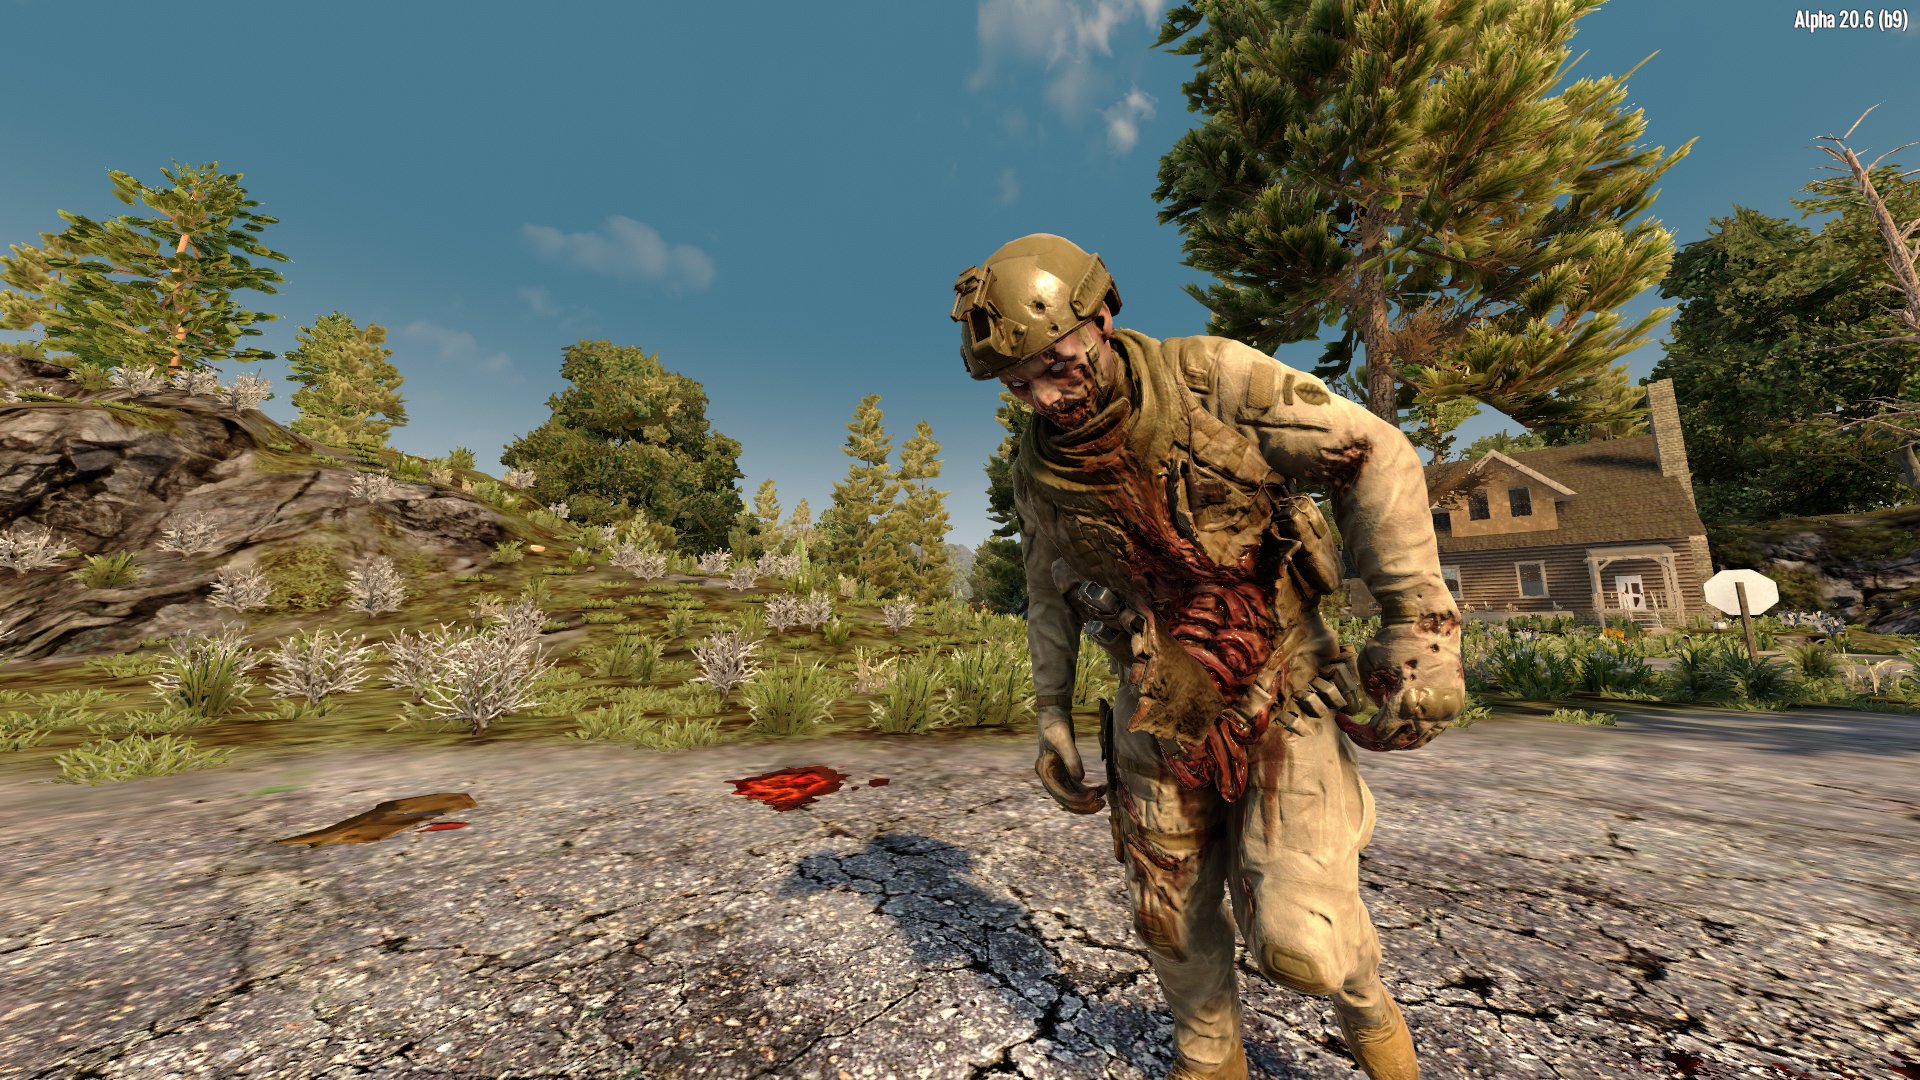 In-game Zombie Hurtling Towards You